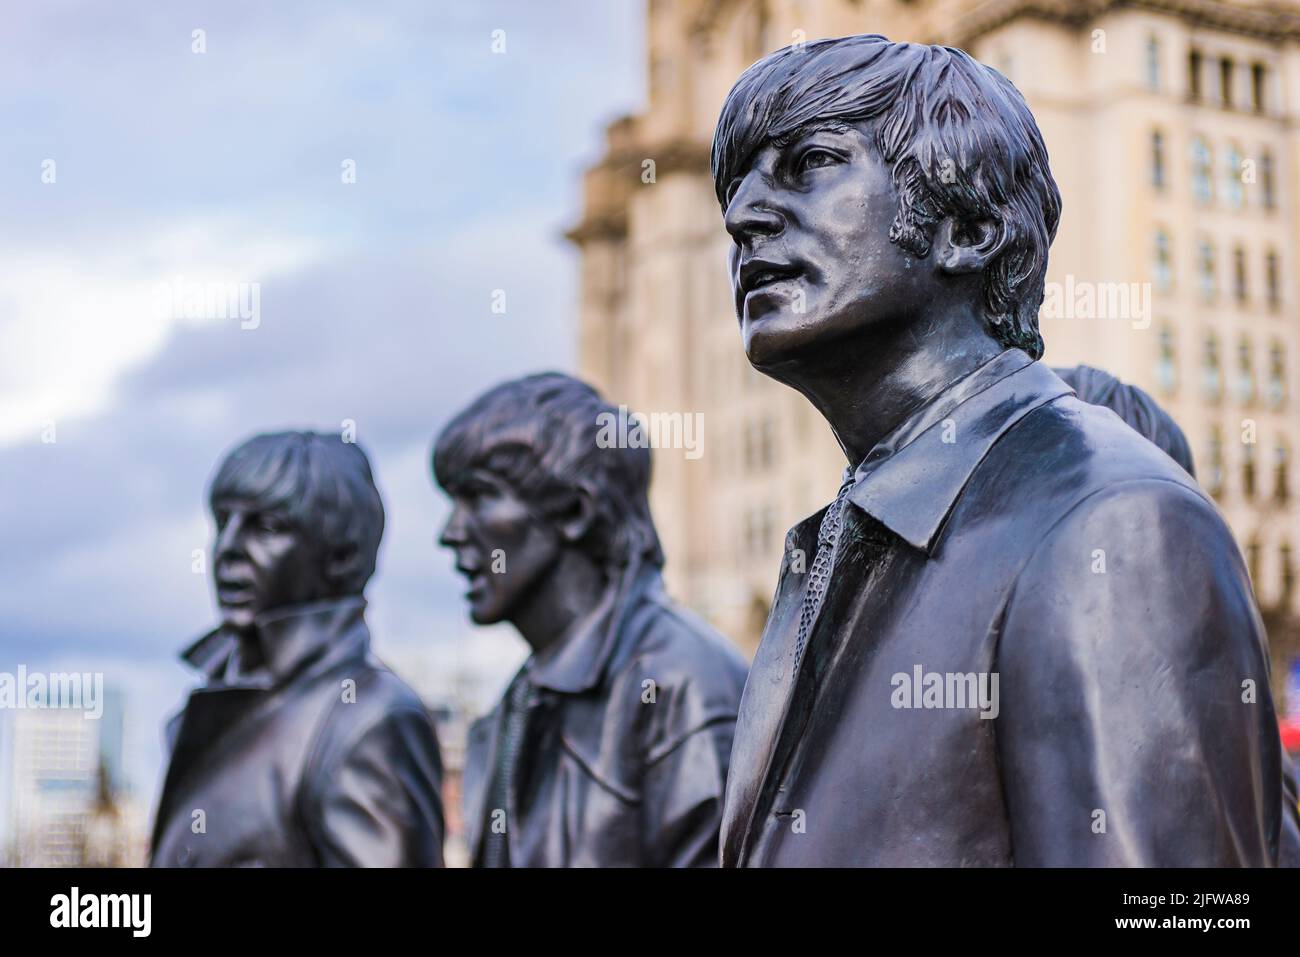 John Lennon, detail. The Beatles statue in their home city Liverpool, at Pier Head on Liverpool waterfront. Leverpool, Merseyside, Lancashire, England Stock Photo